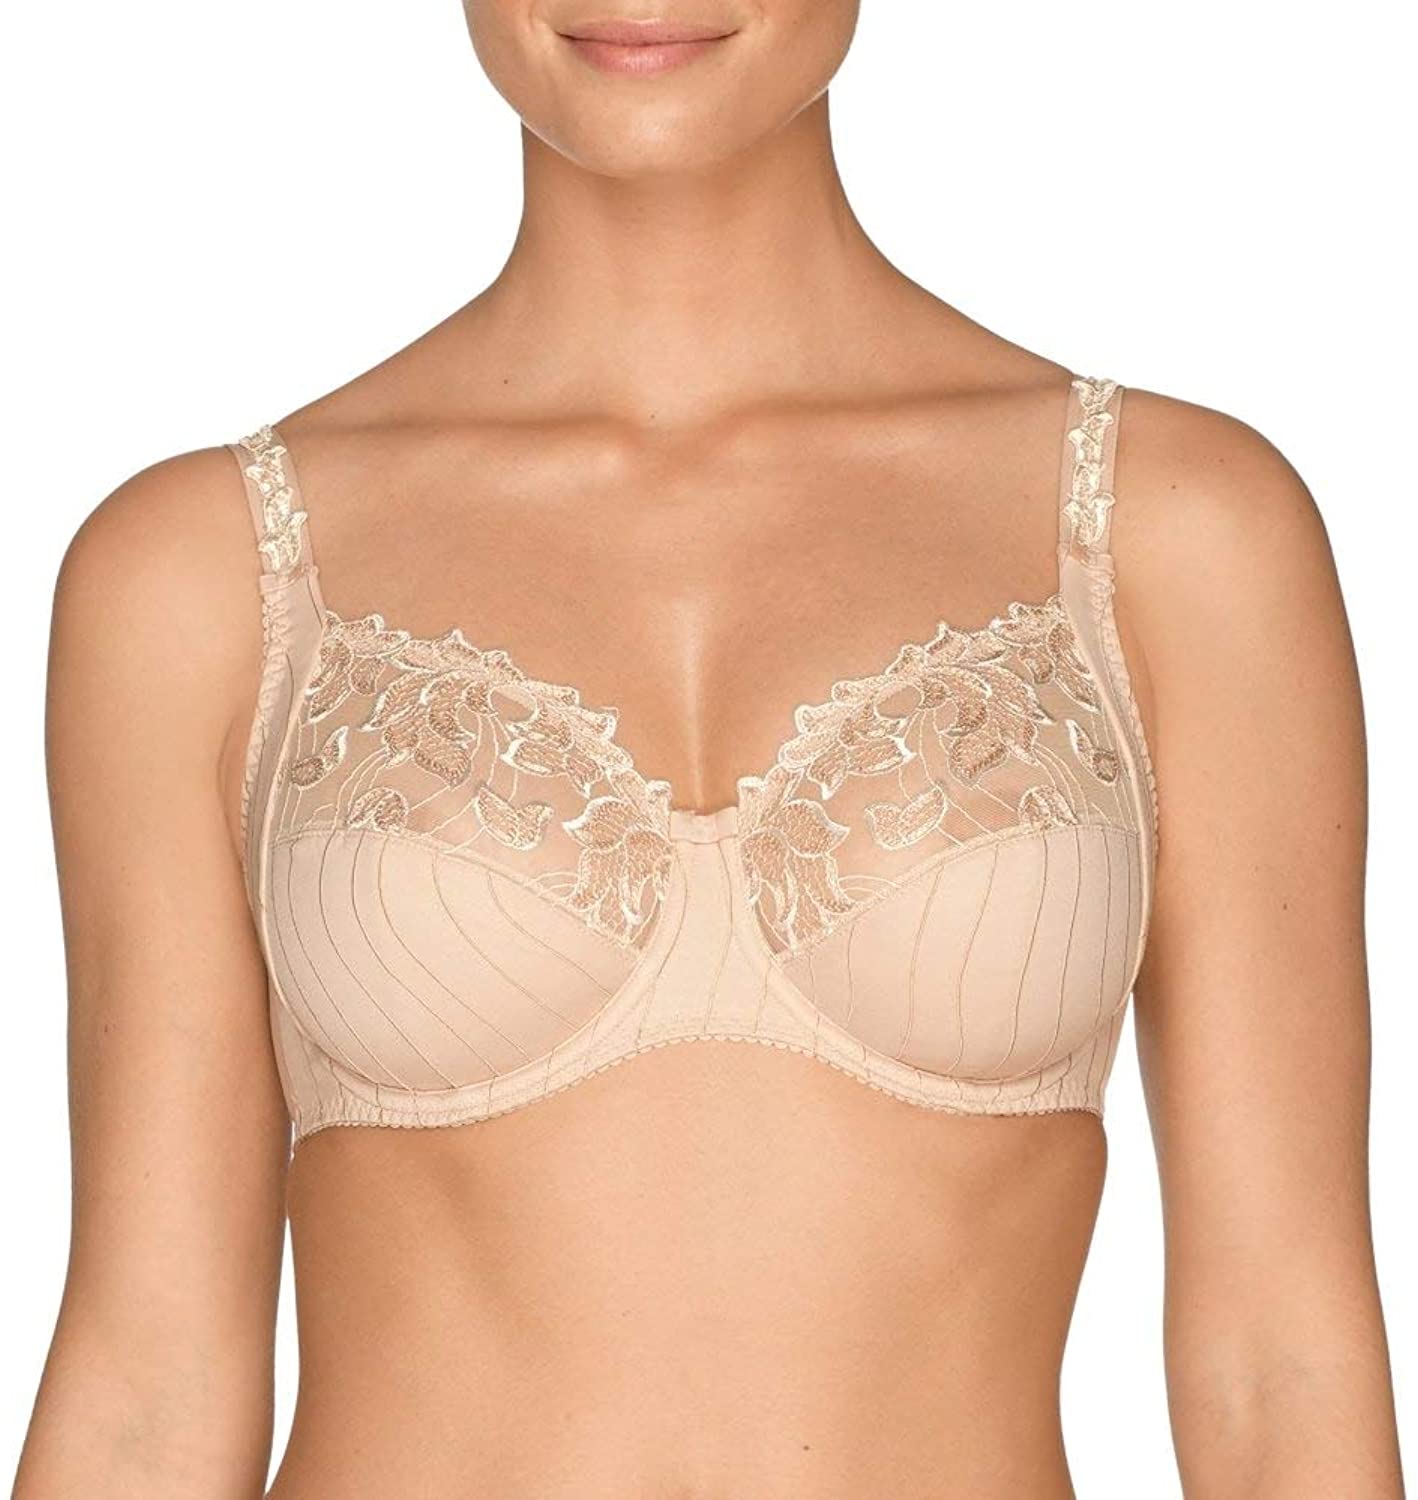 Luxury Bra for Sagging Breasts